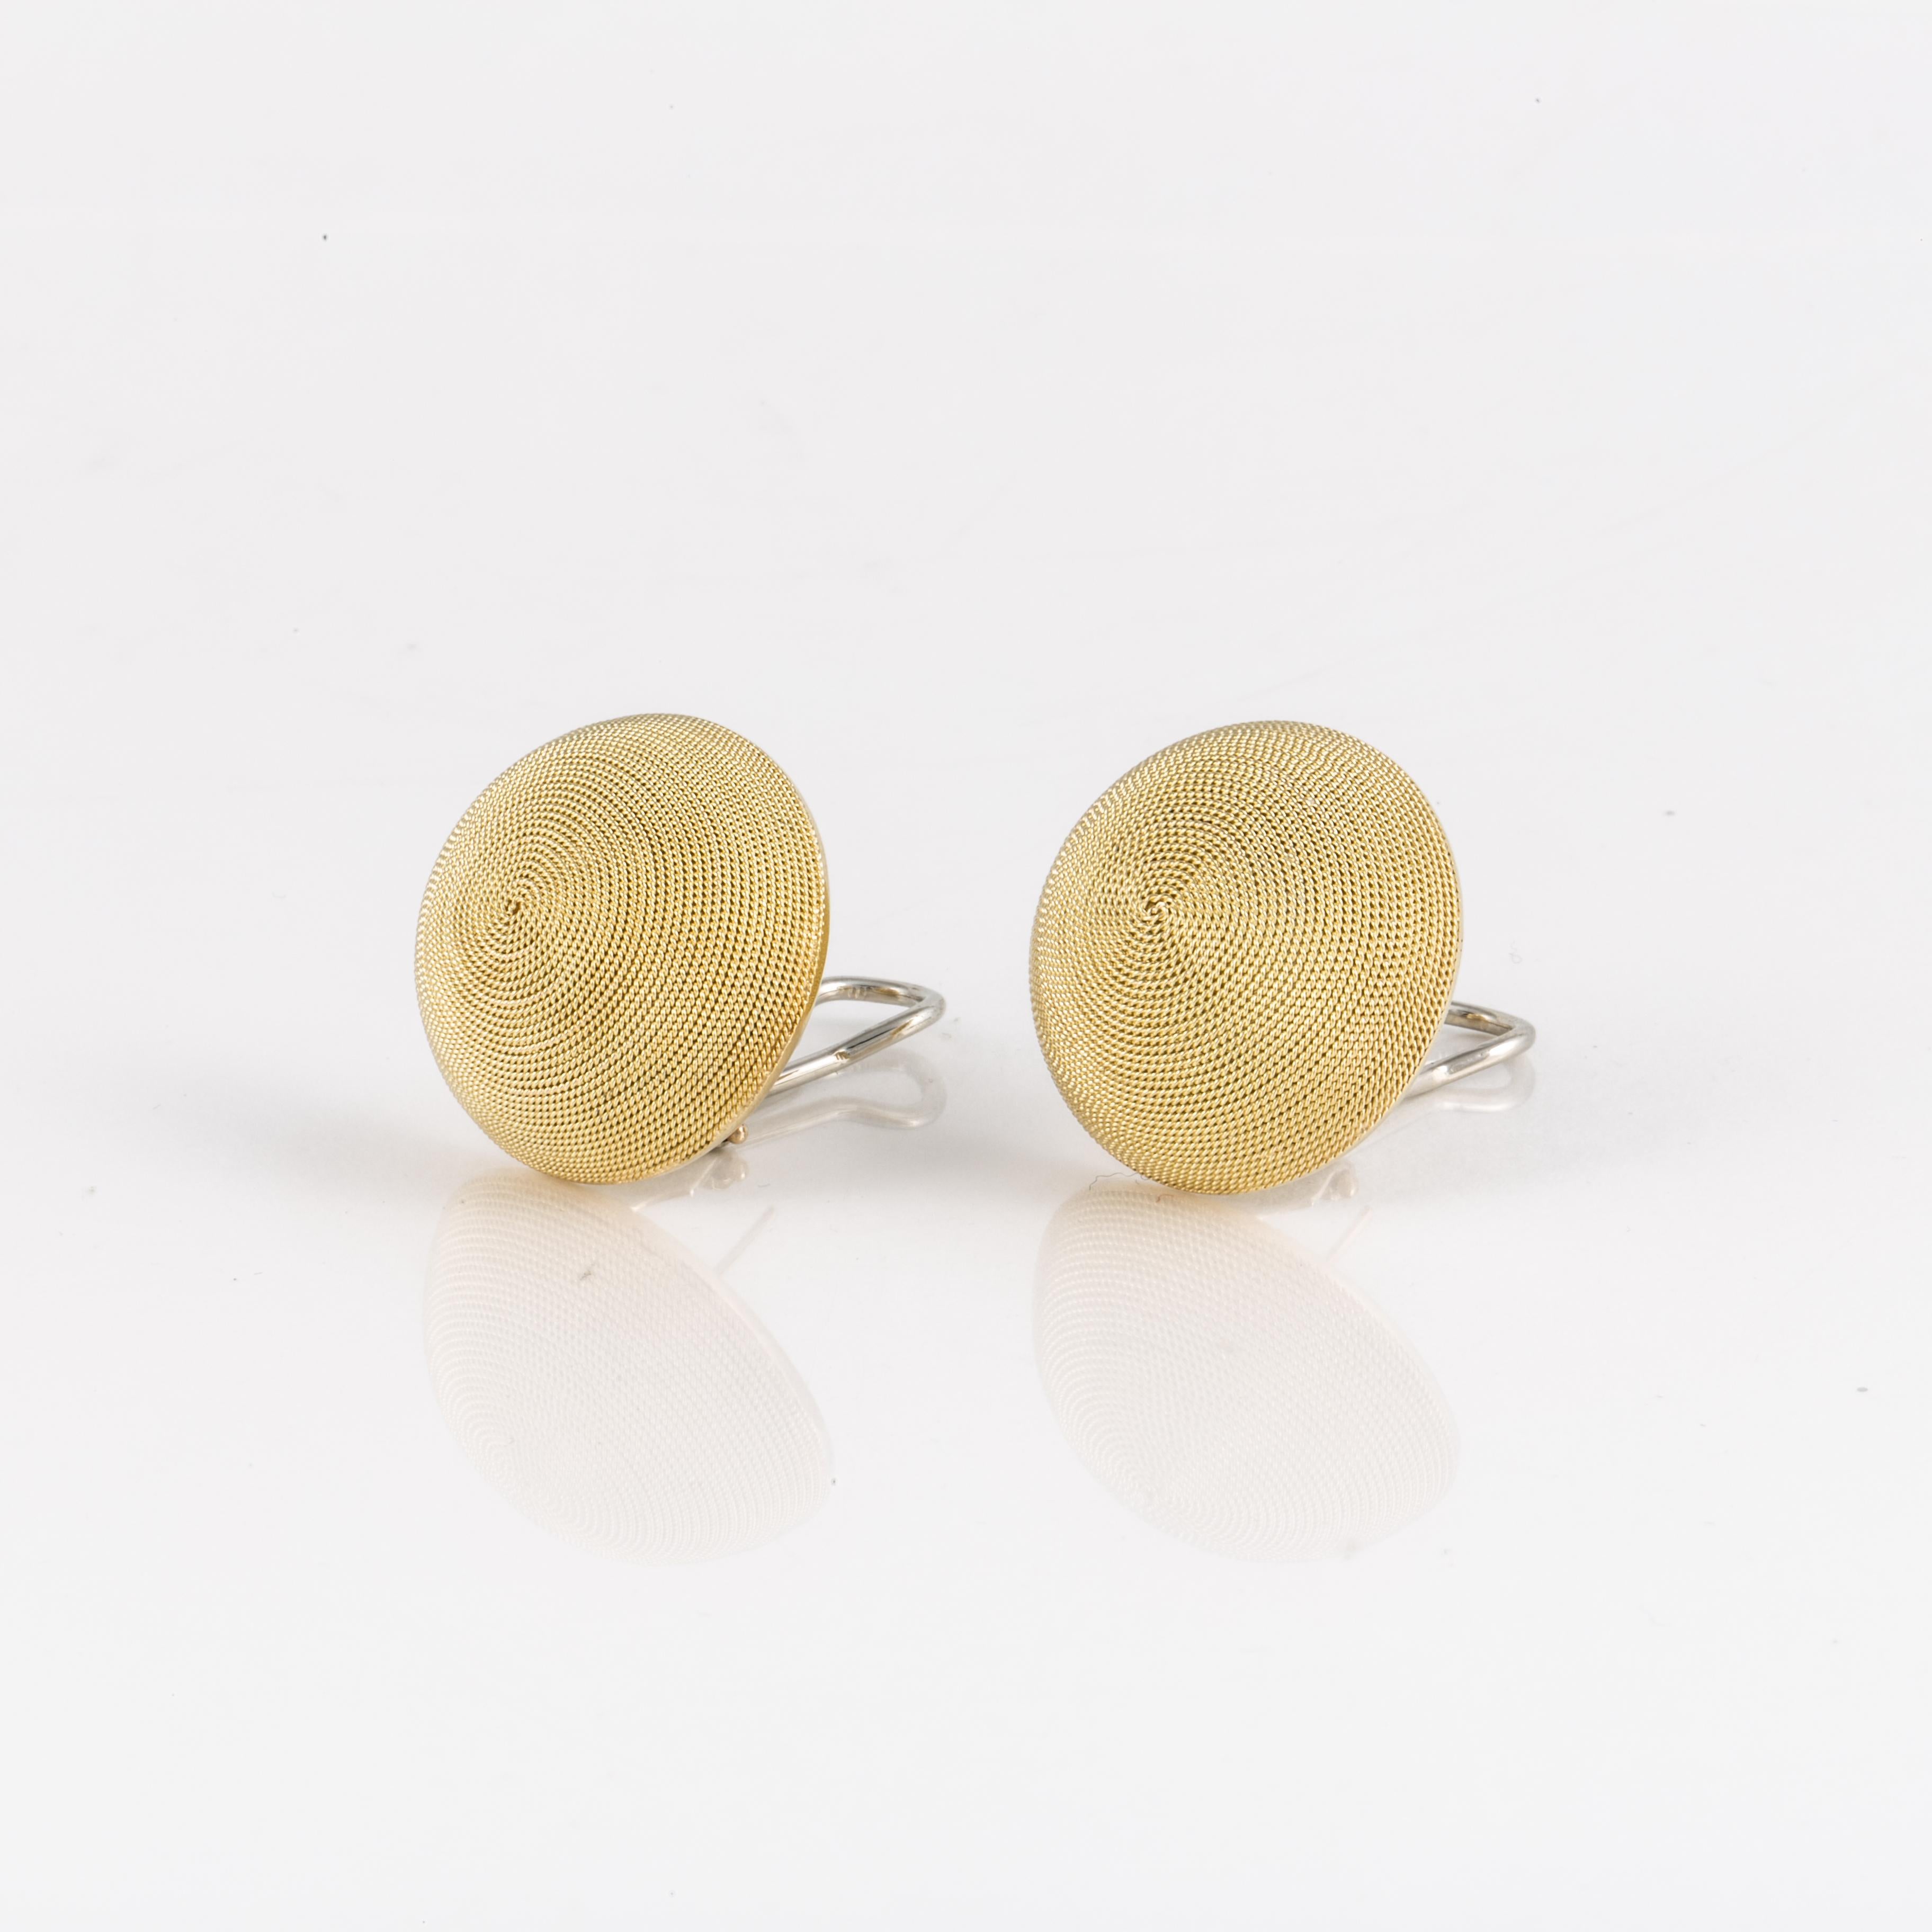 18K yellow gold button earrings with a beautiful textured finish.  Measure 1 inch across and stand 7/16 inches off the ear.  They are for pierced ears with an omega back. 